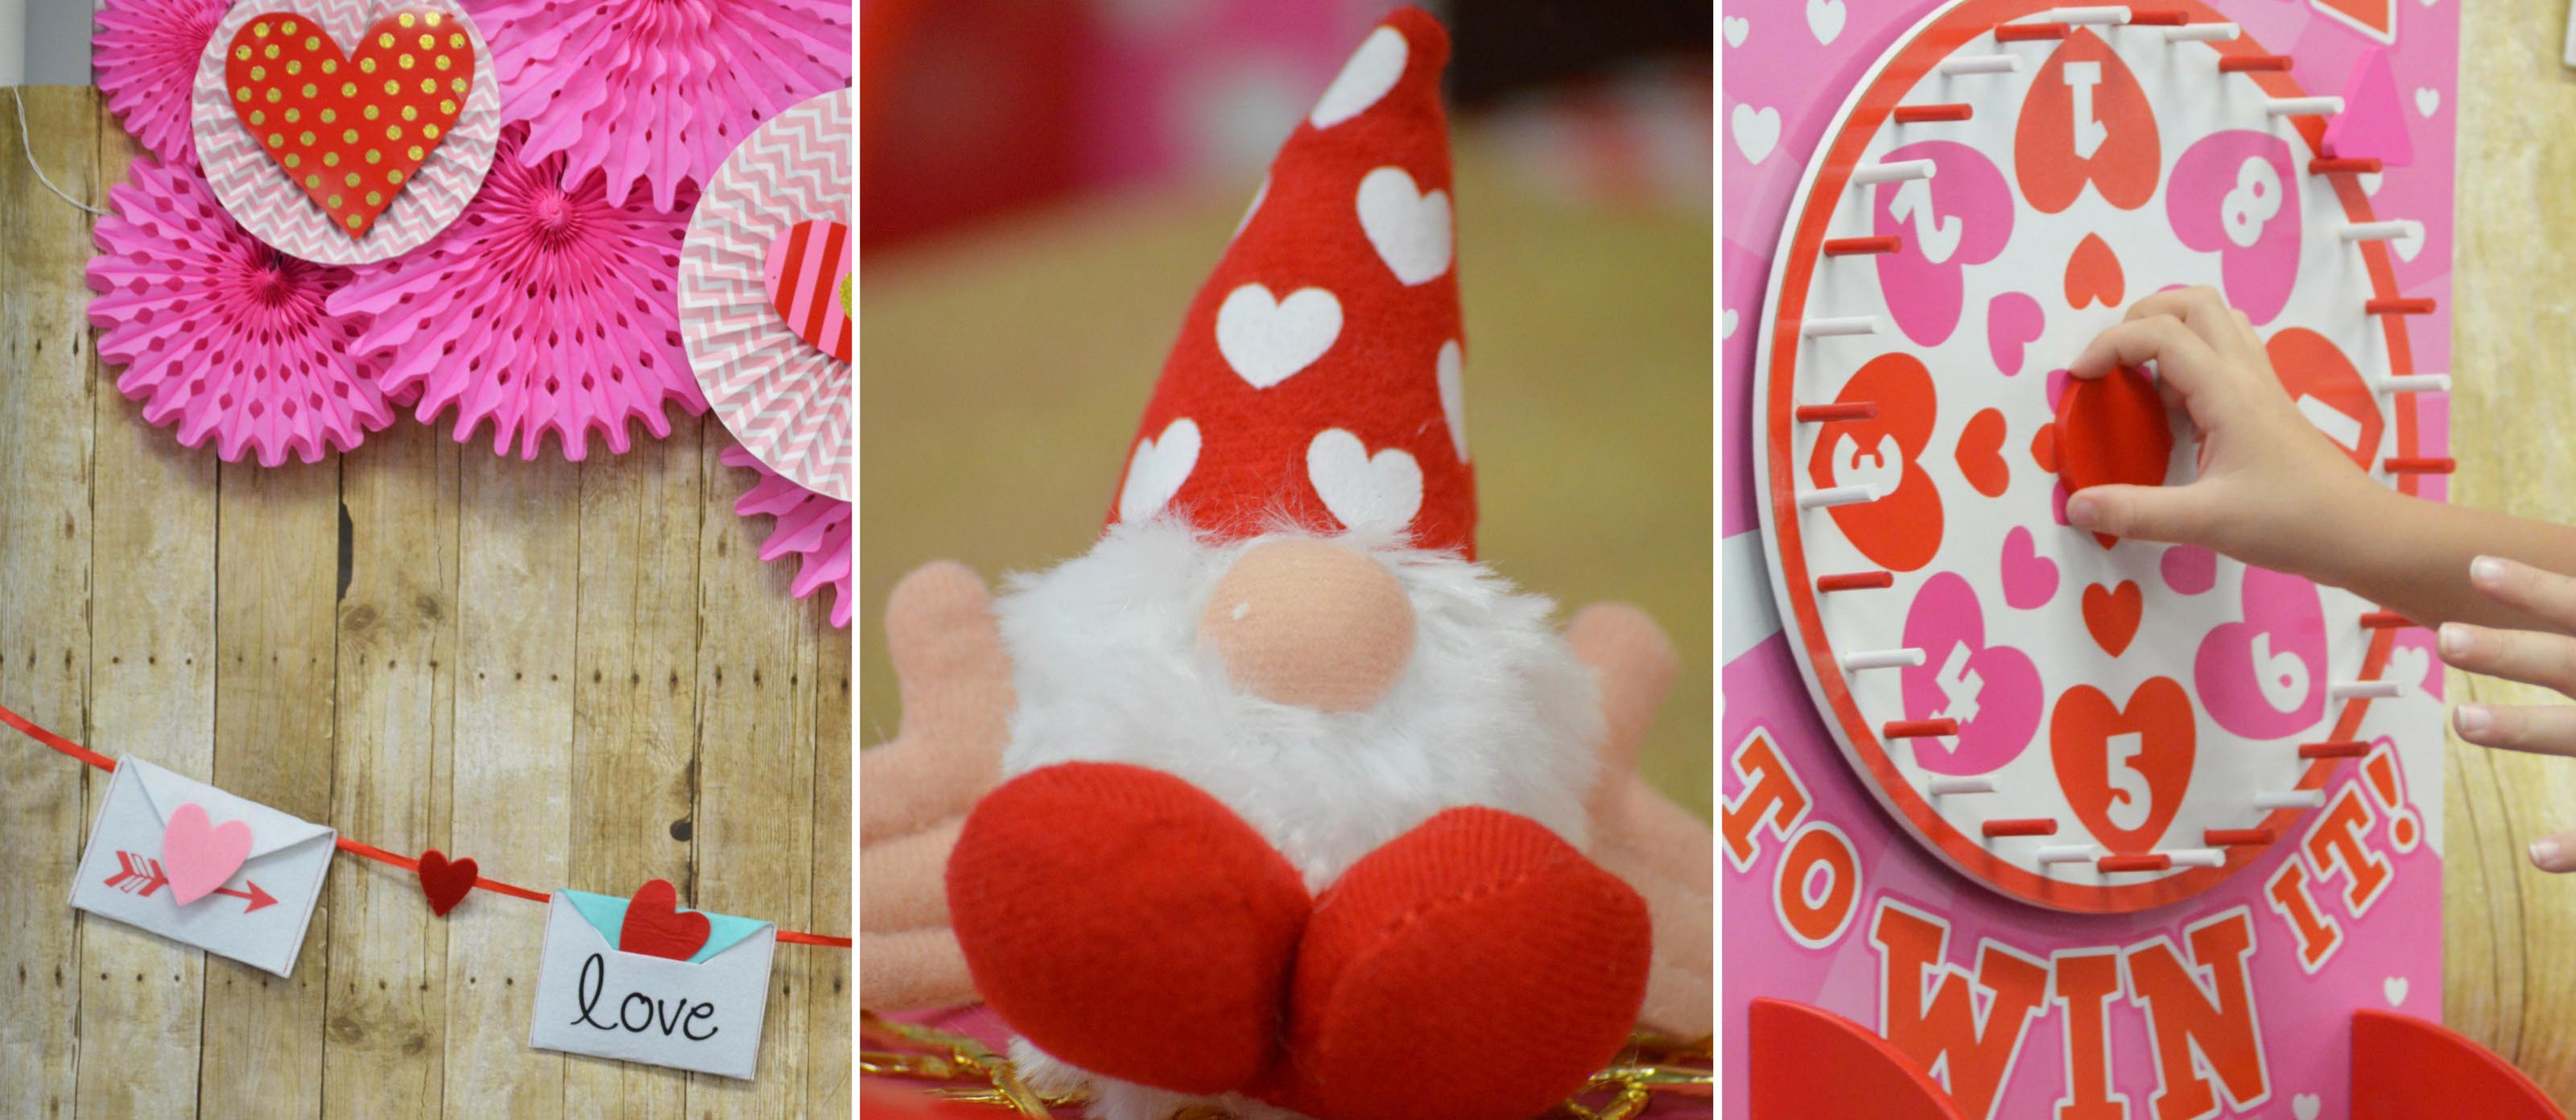 35 Valentine's Day Classroom Party Ideas - Make and Takes